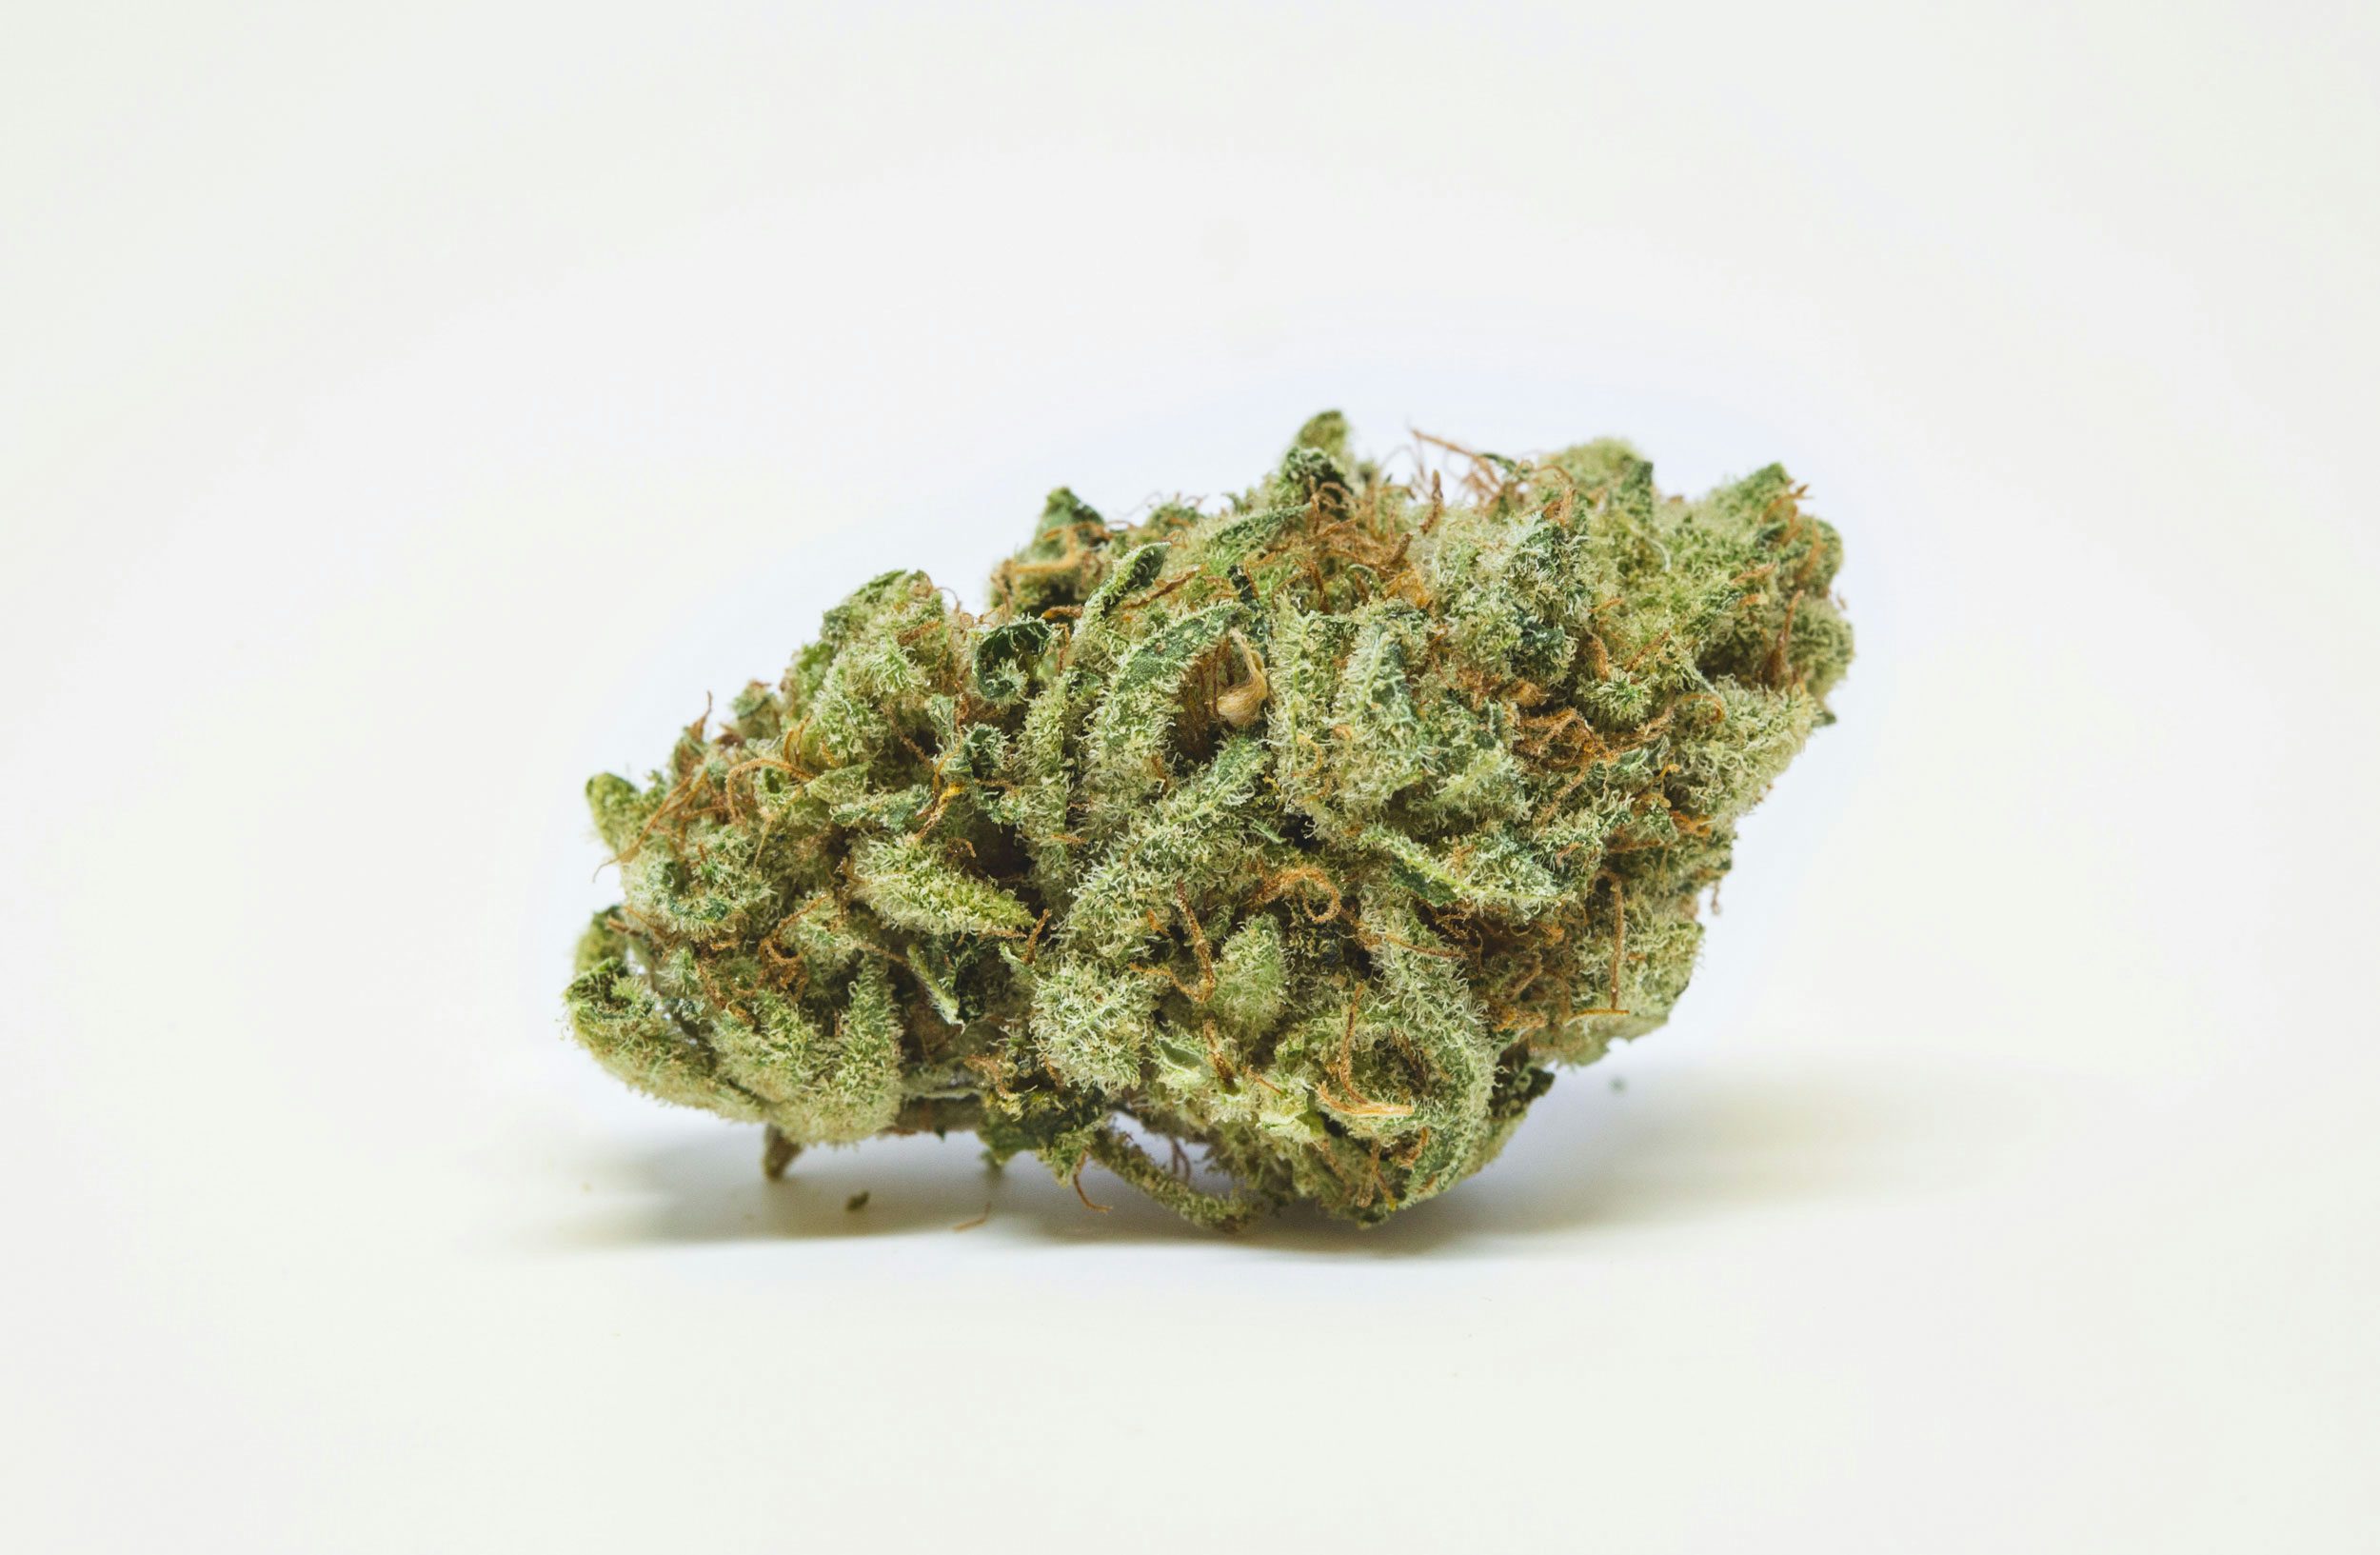 1Best Star Wars Strains To Take You To A Galaxy Far Far Away Best Star Wars Strains To Take You To A Galaxy Far, Far Away